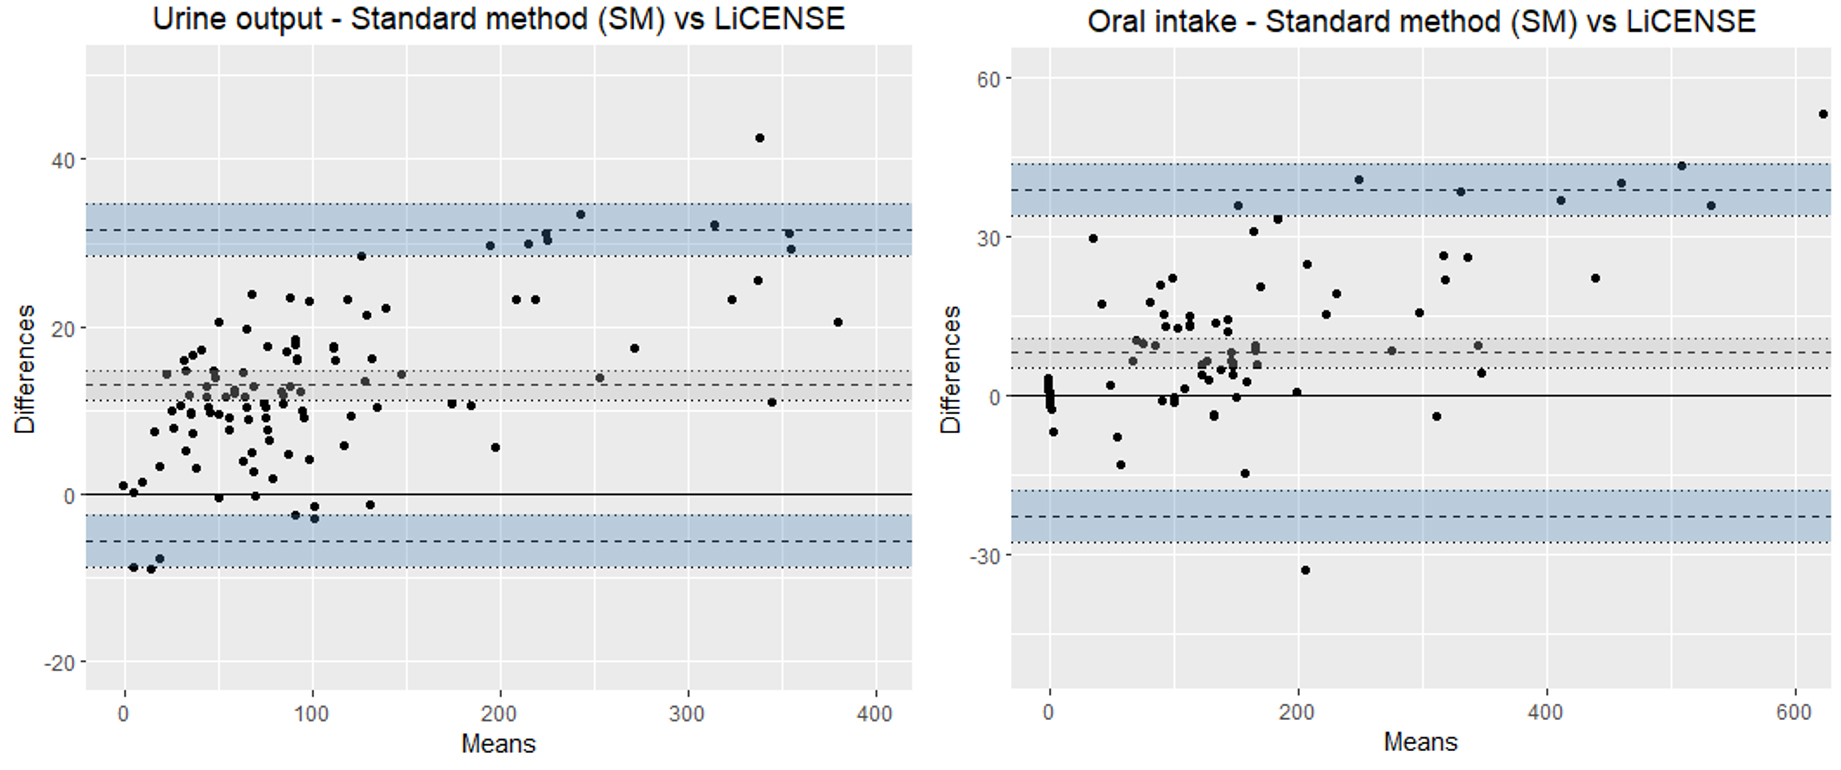 Bland-Altman plots illustrating the agreement of LICENSE and the standard method (SM) in measuring oral fluid intake (left) and urinary output (right).